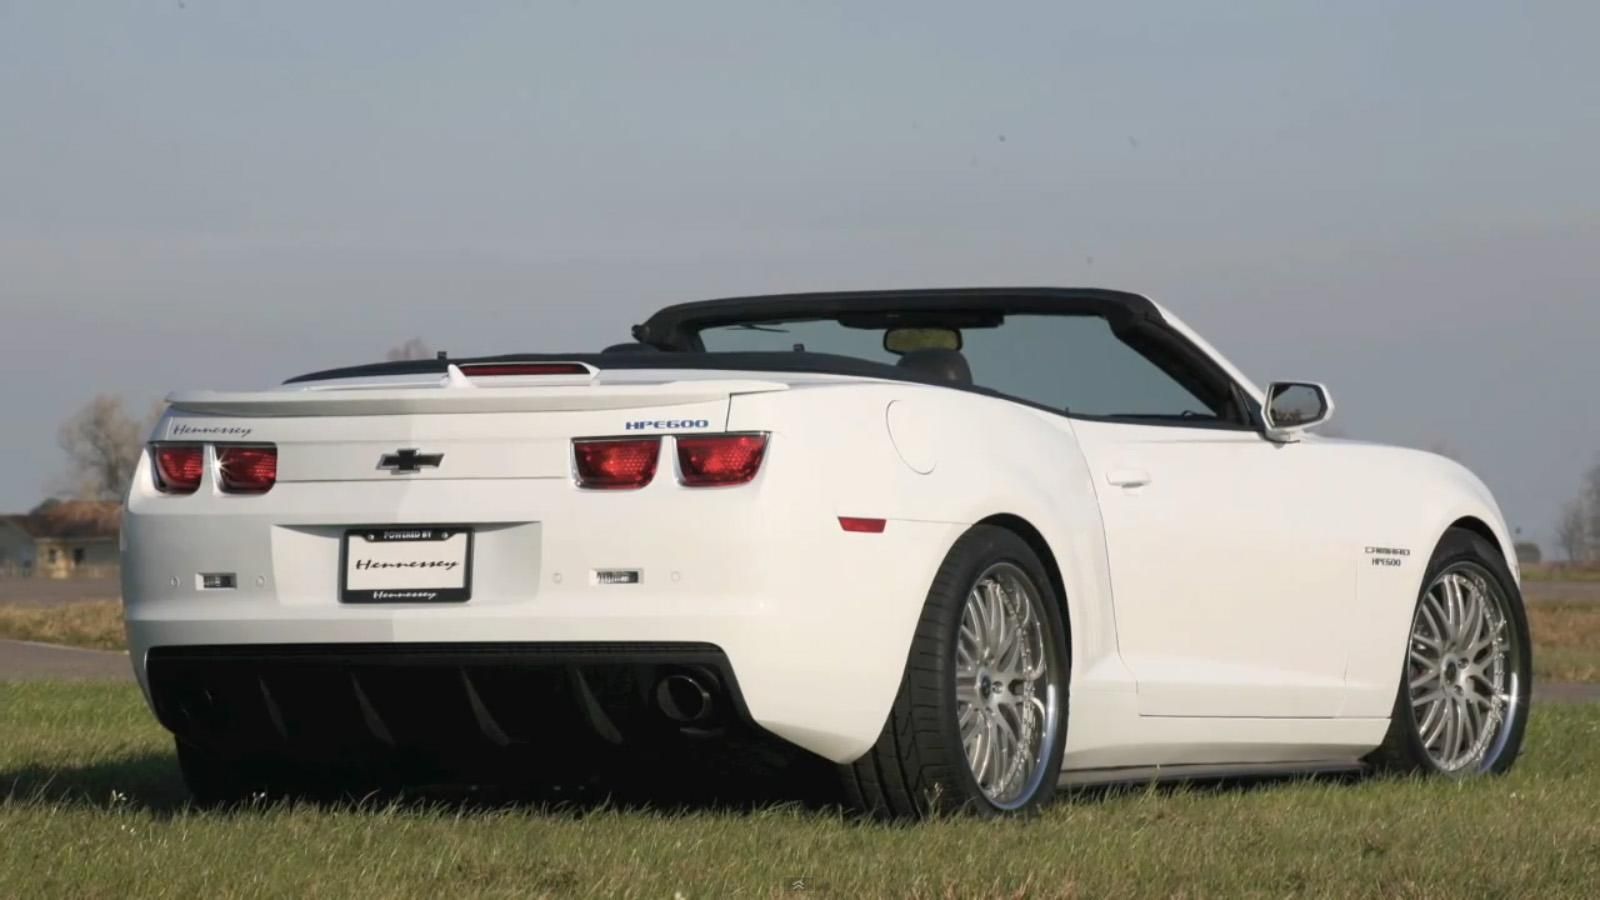 2011 Chevrolet Camaro Convertible 'HPE600' by Hennessey